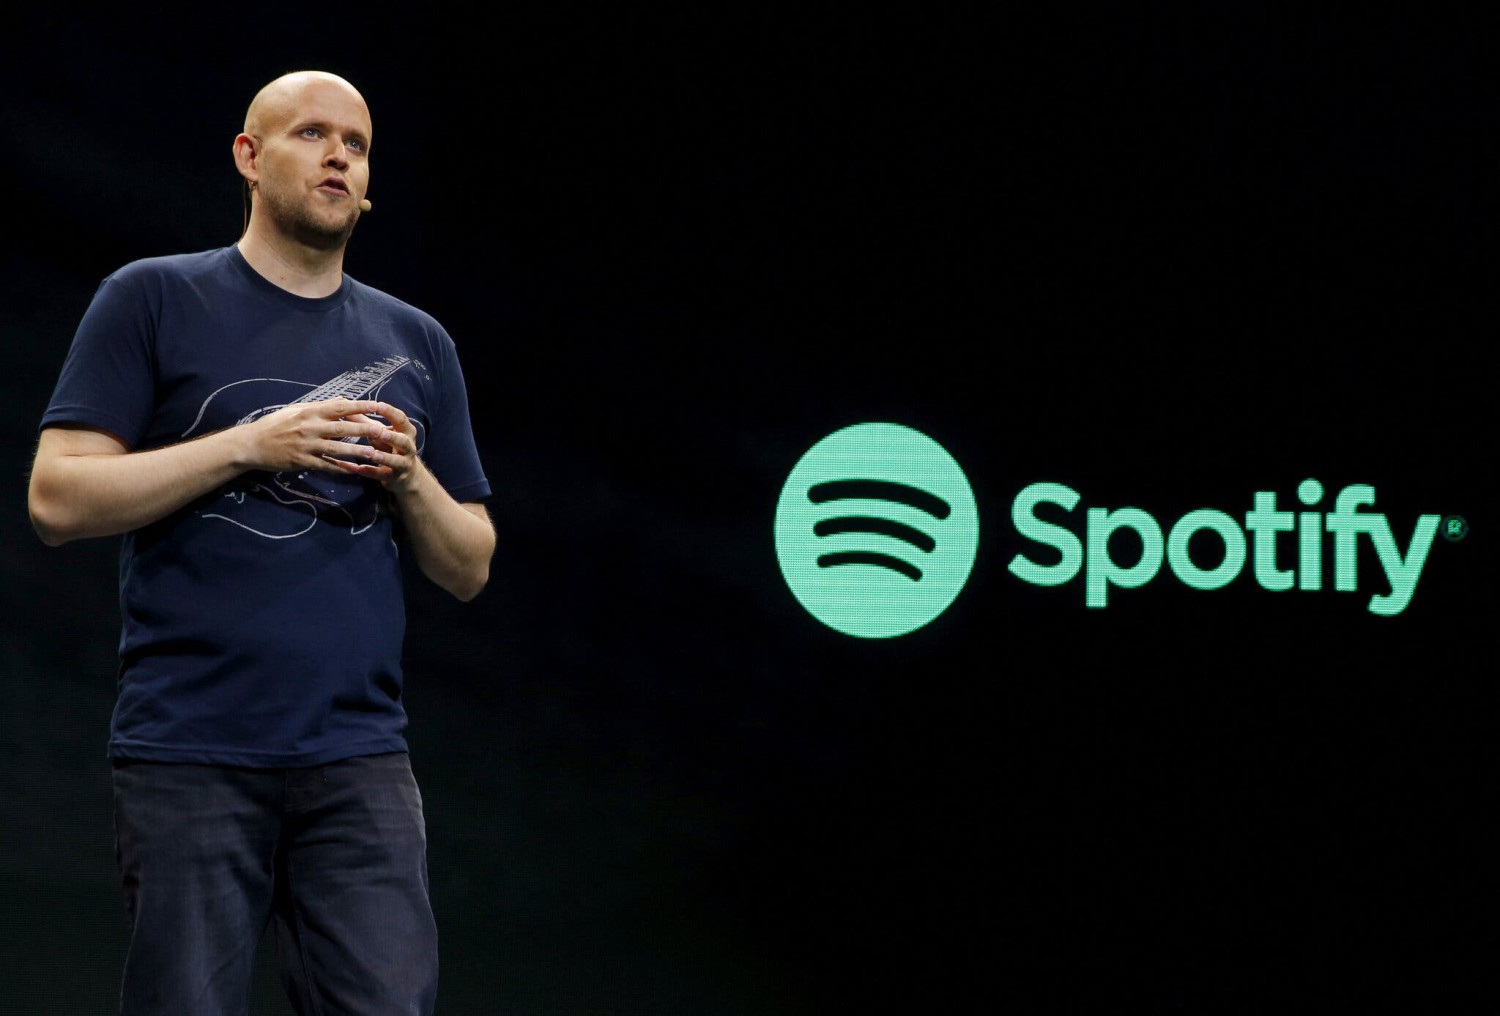 Spotify to Cut 1,500 Jobs After Spending Spree